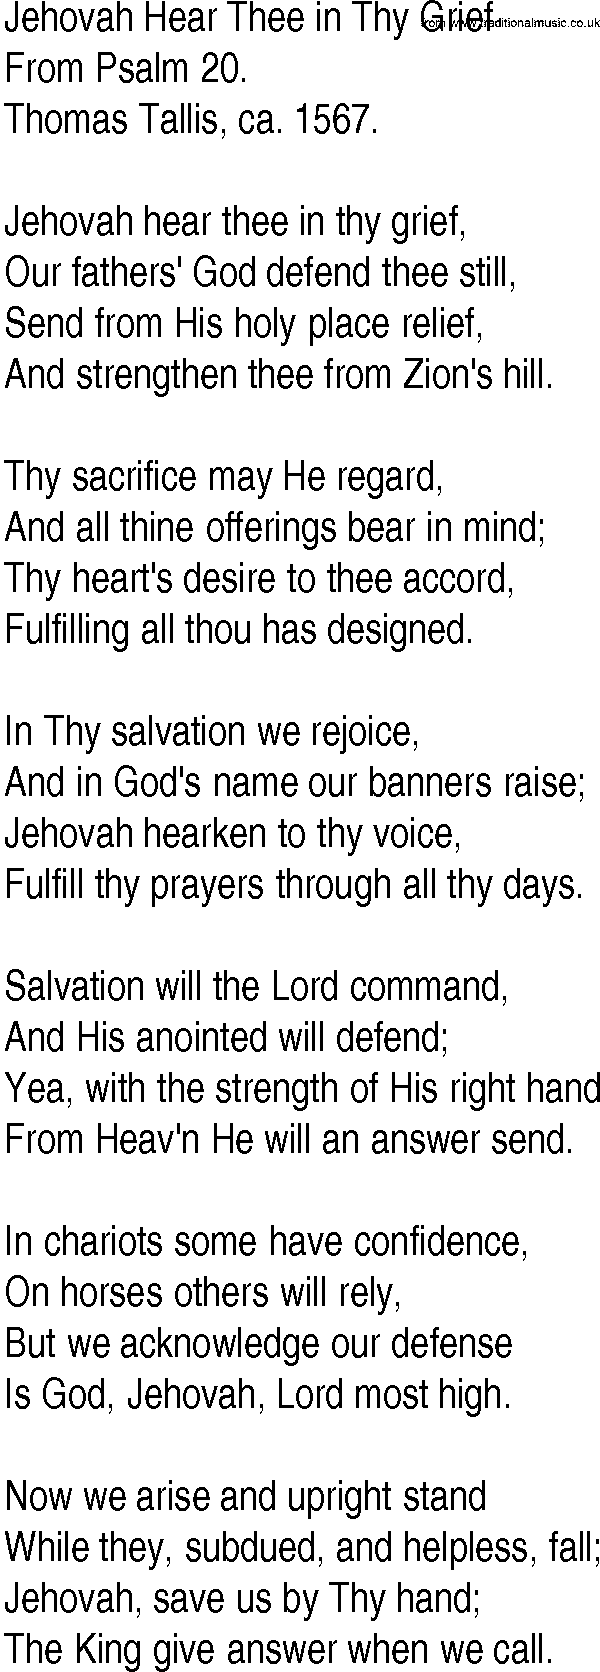 Hymn and Gospel Song: Jehovah Hear Thee in Thy Grief by From Psalm lyrics